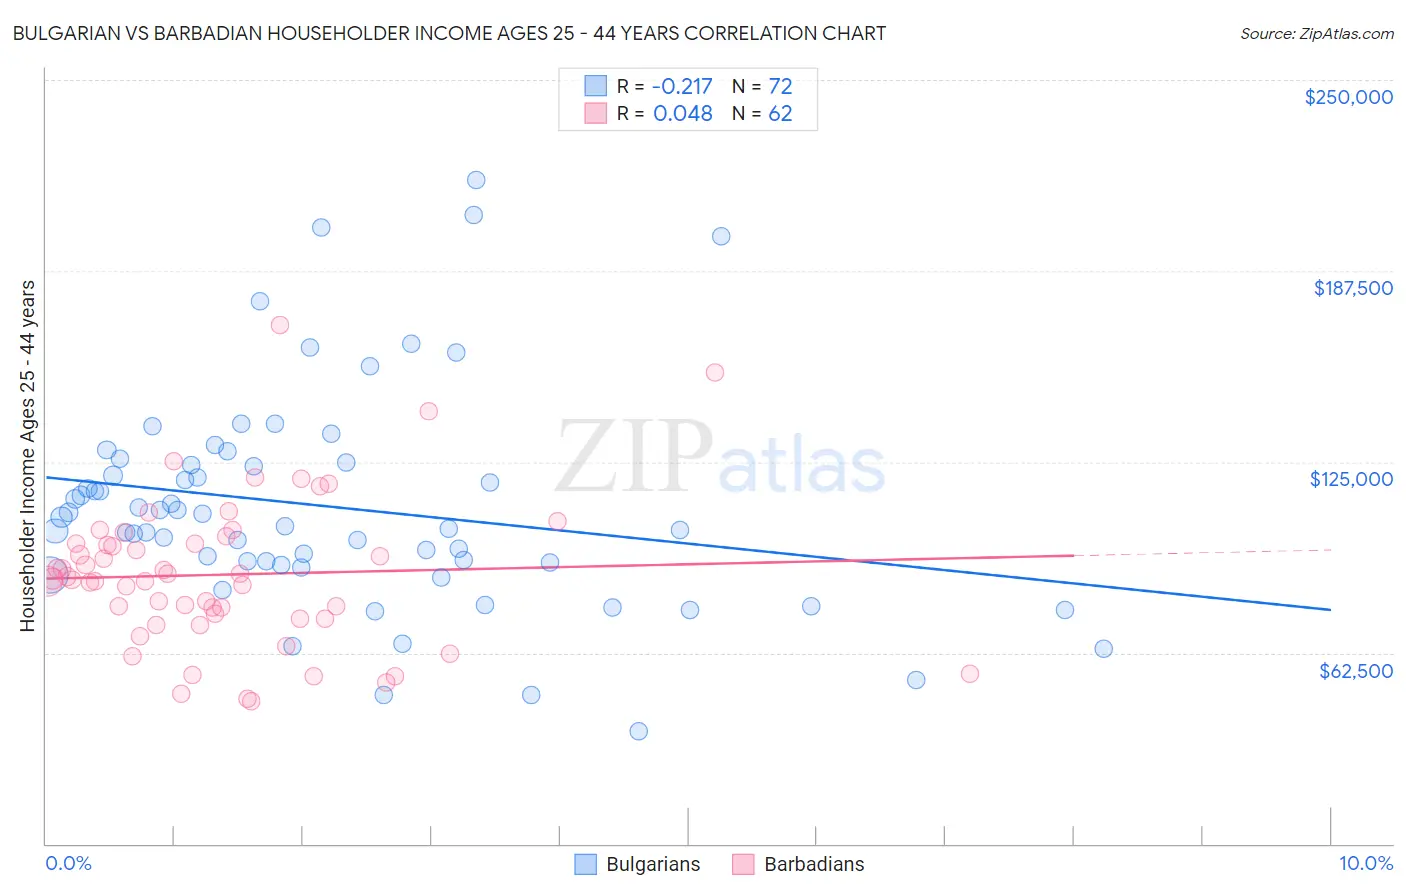 Bulgarian vs Barbadian Householder Income Ages 25 - 44 years